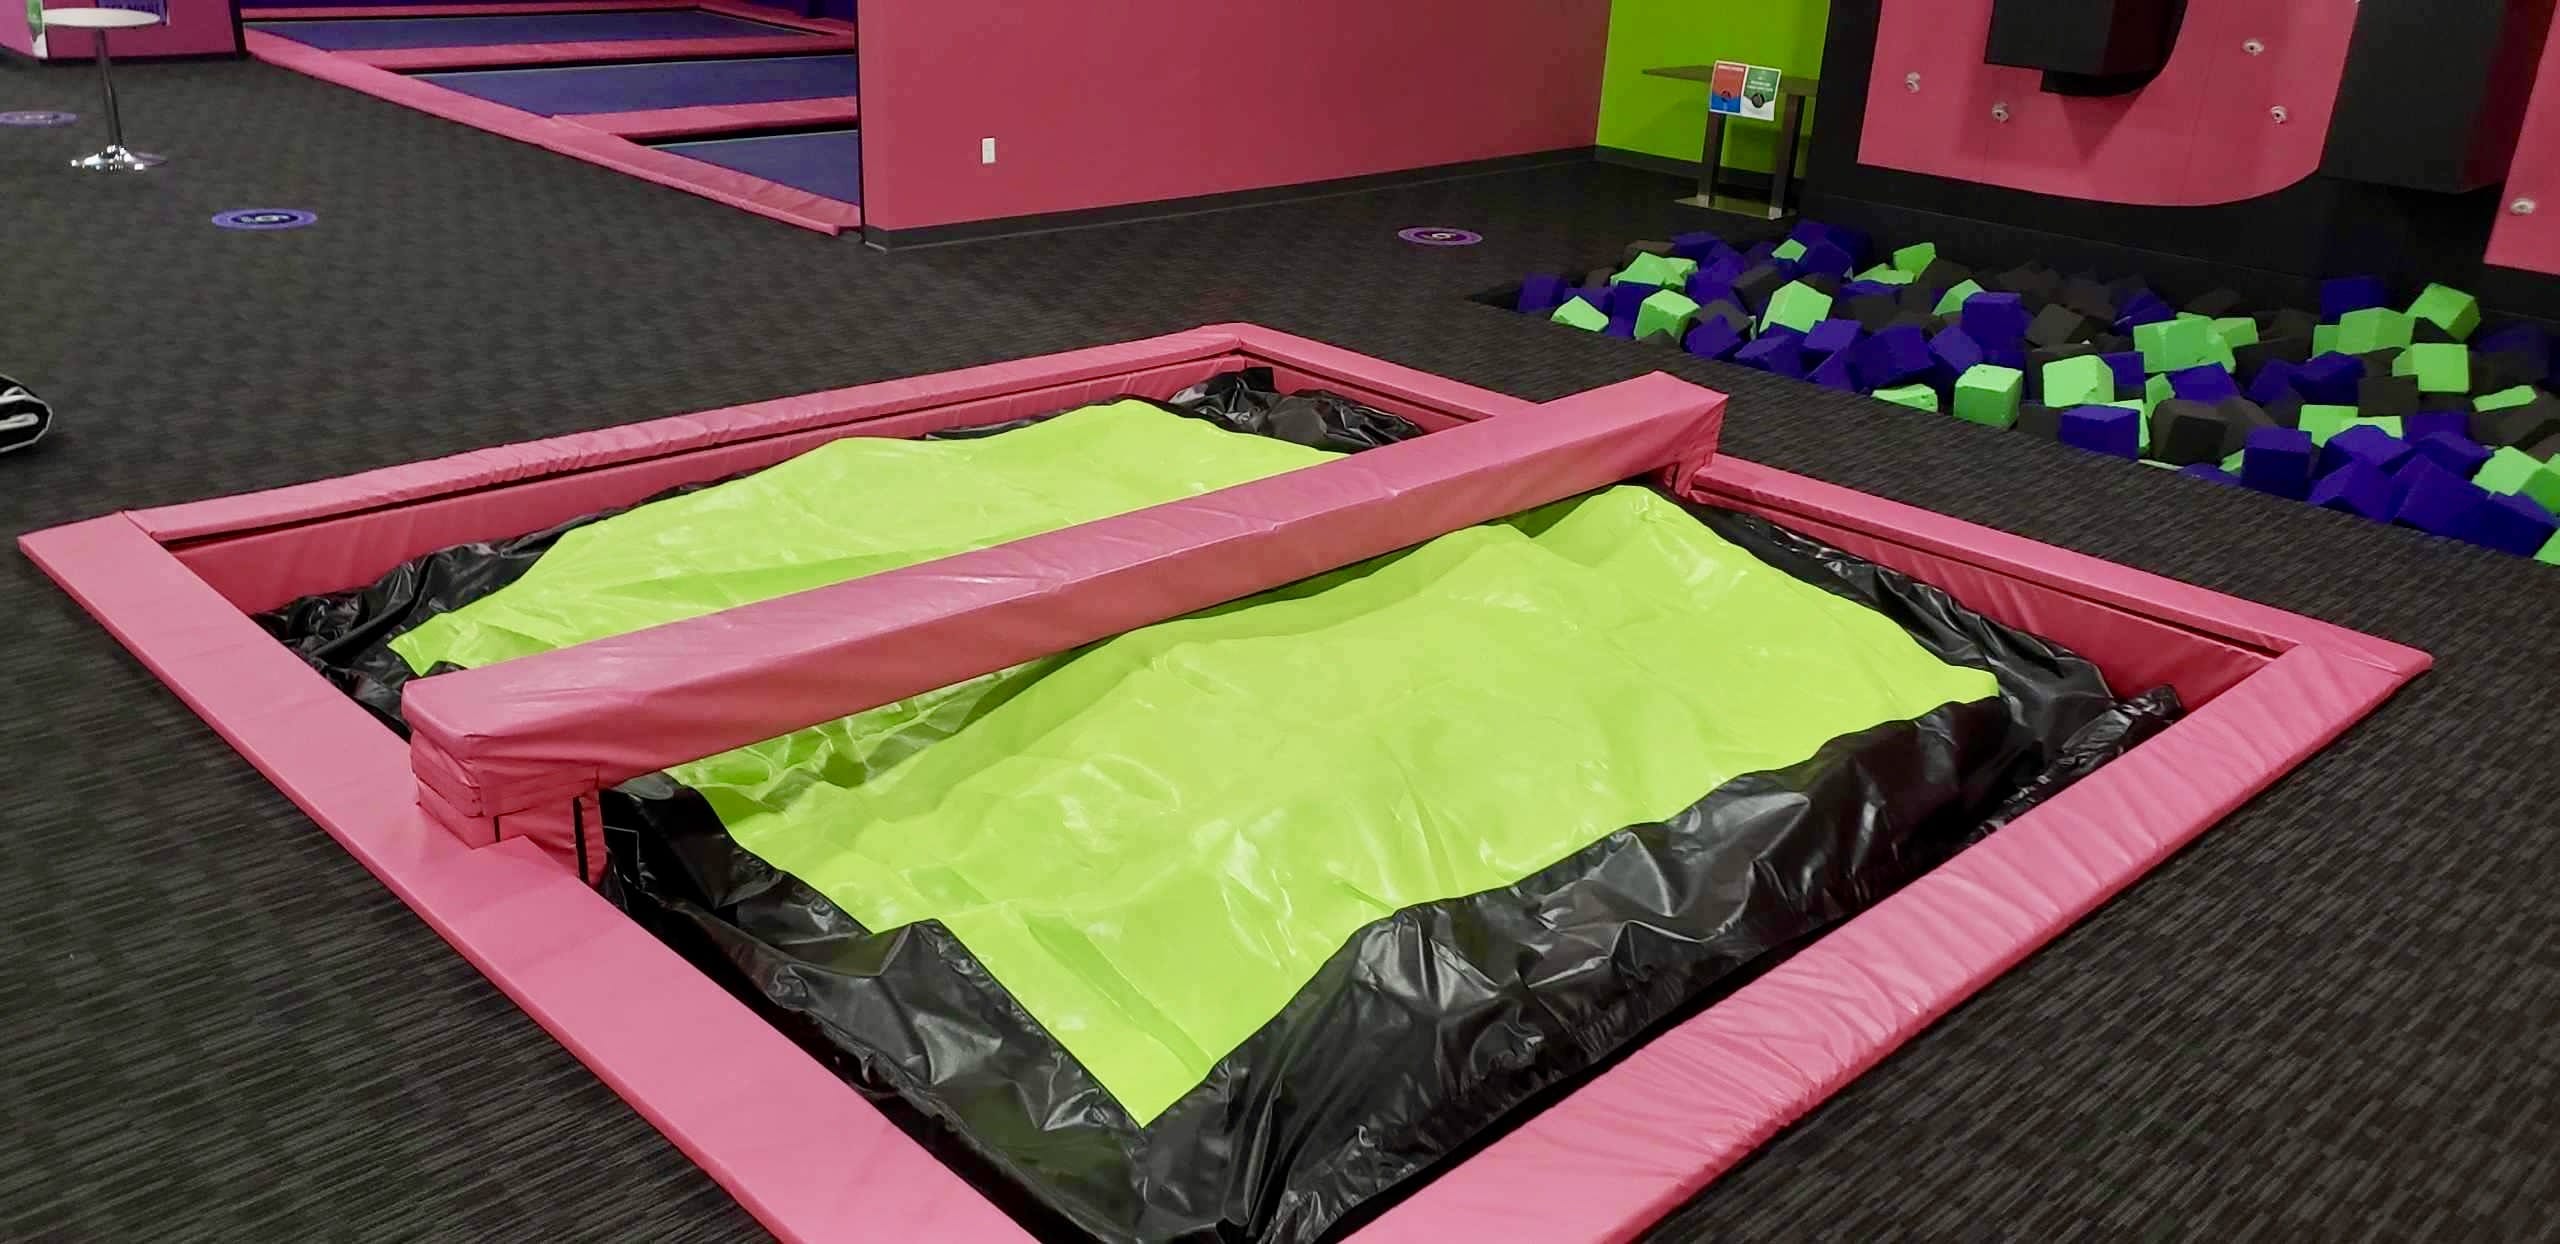 Battle beam over foam pit cover.